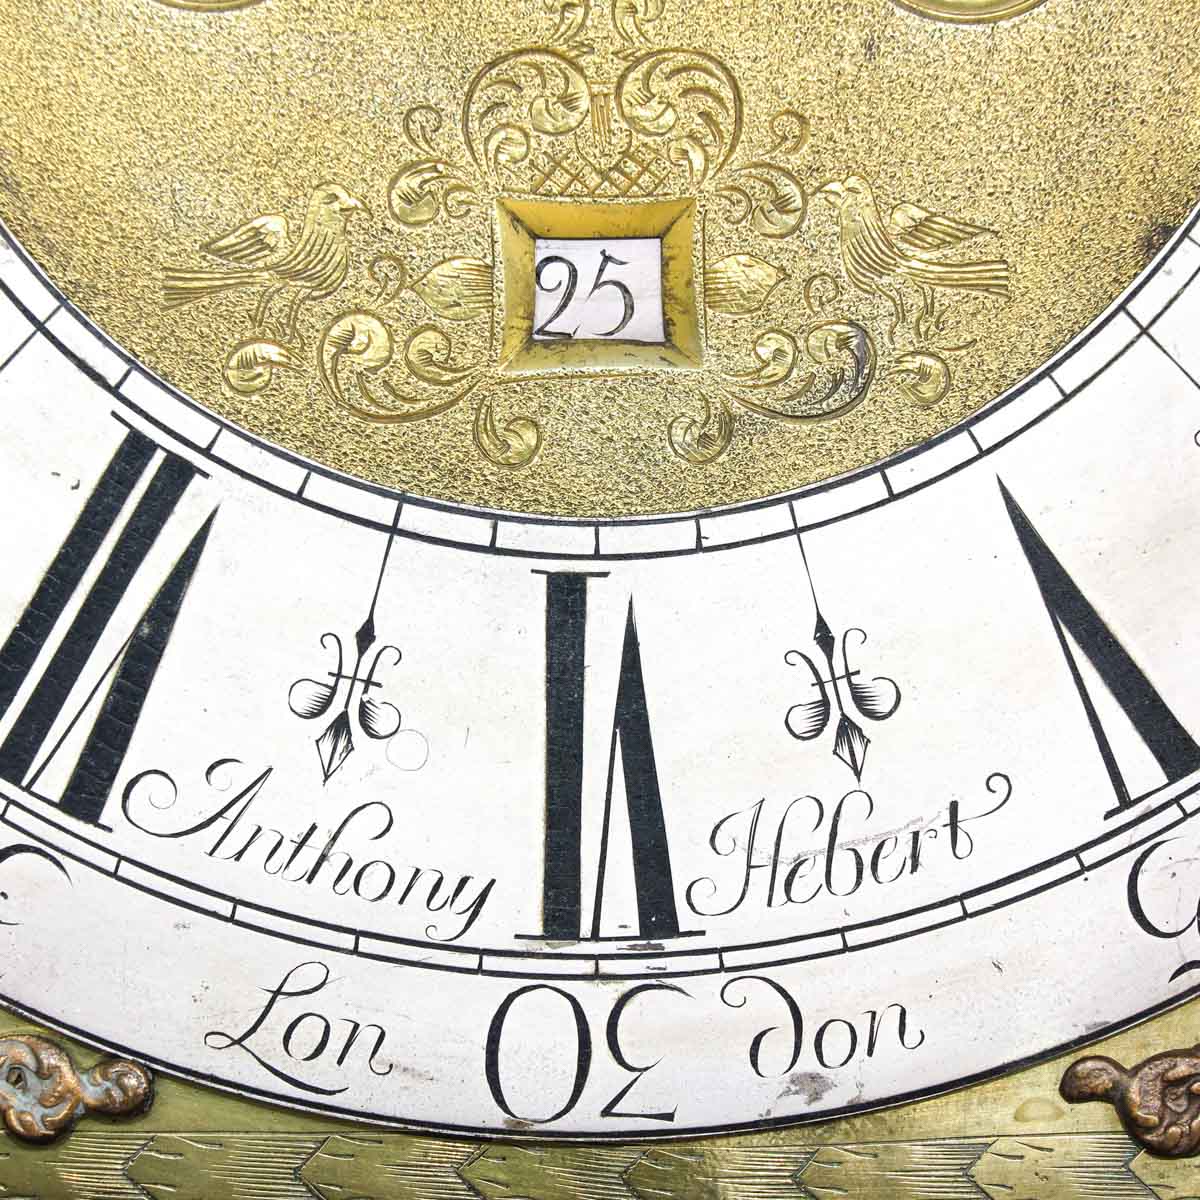 A Long Case Clock - Image 6 of 10